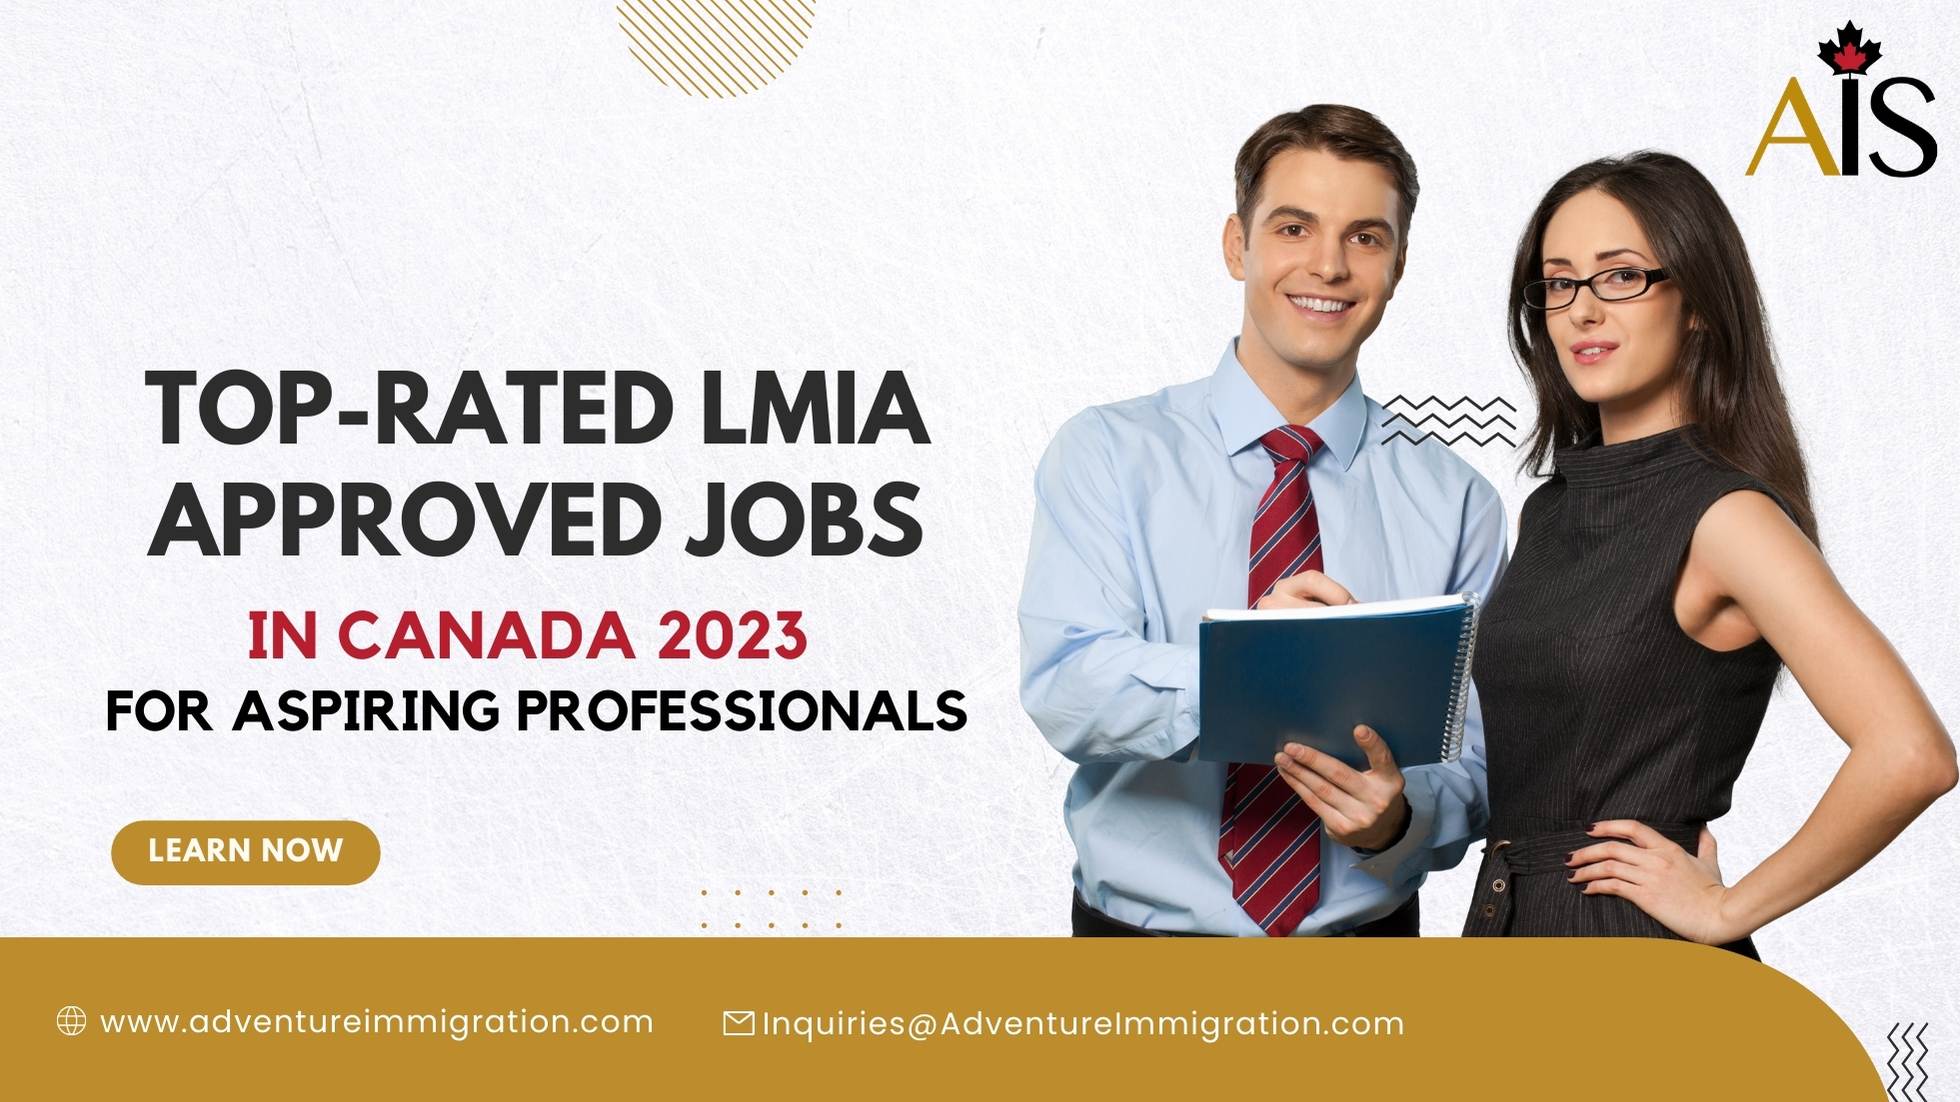 LMIA Approved Jobs in Canada 2023